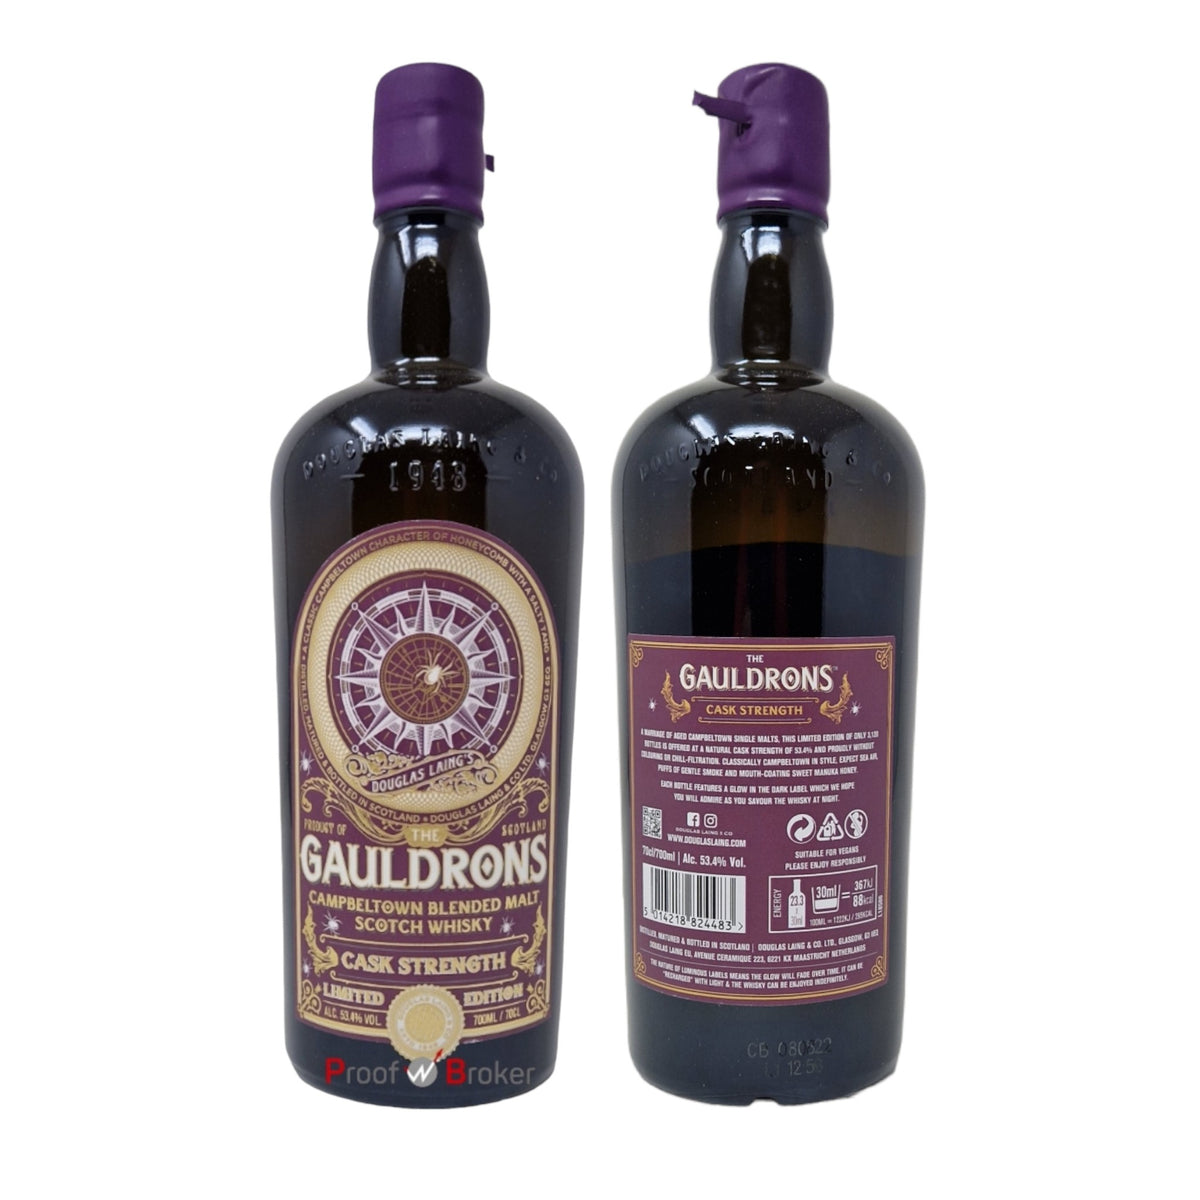 Gauldrons Cask Strength Limited Edition 0,7 L